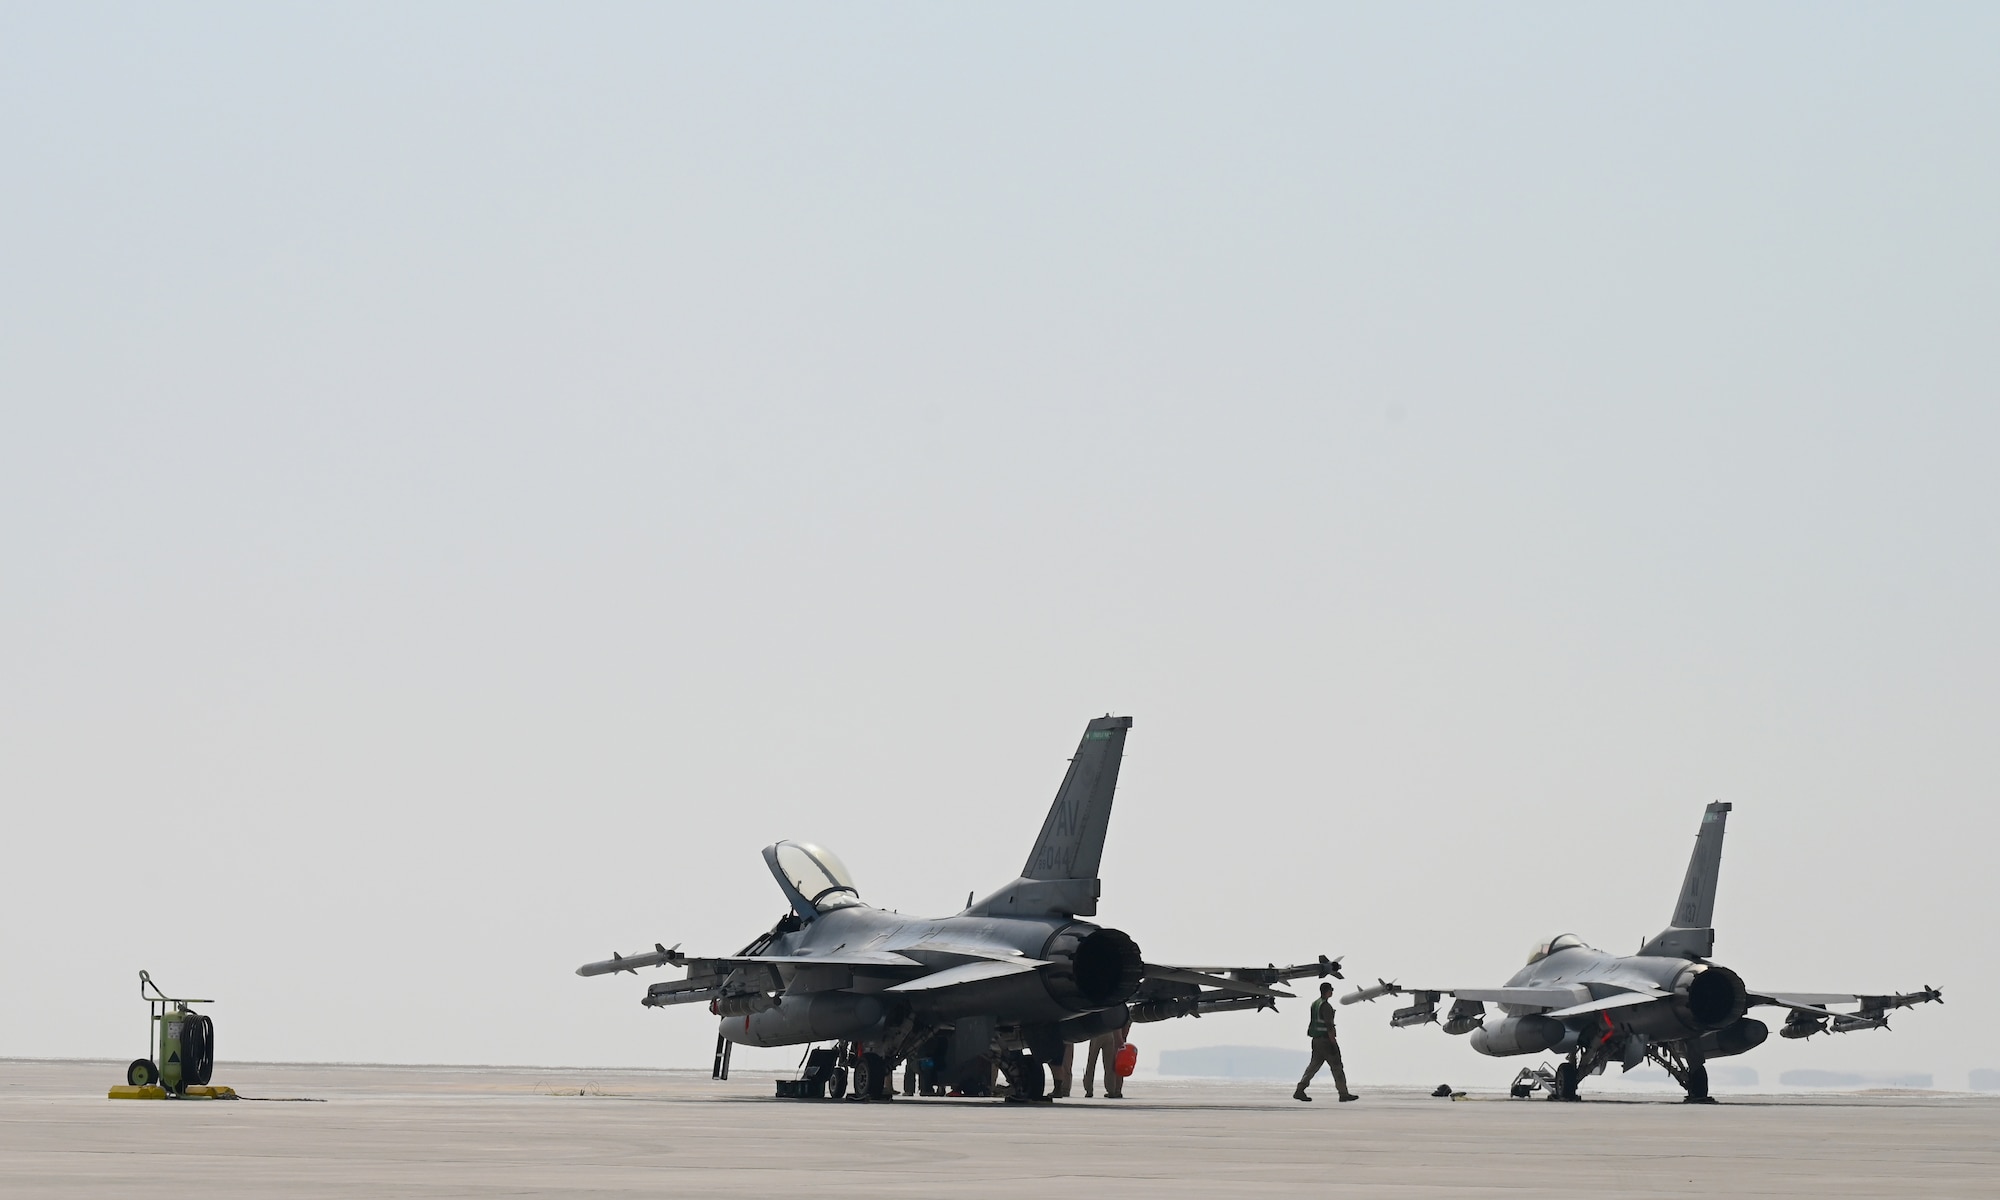 A photo of two jets sitting on the flightline.